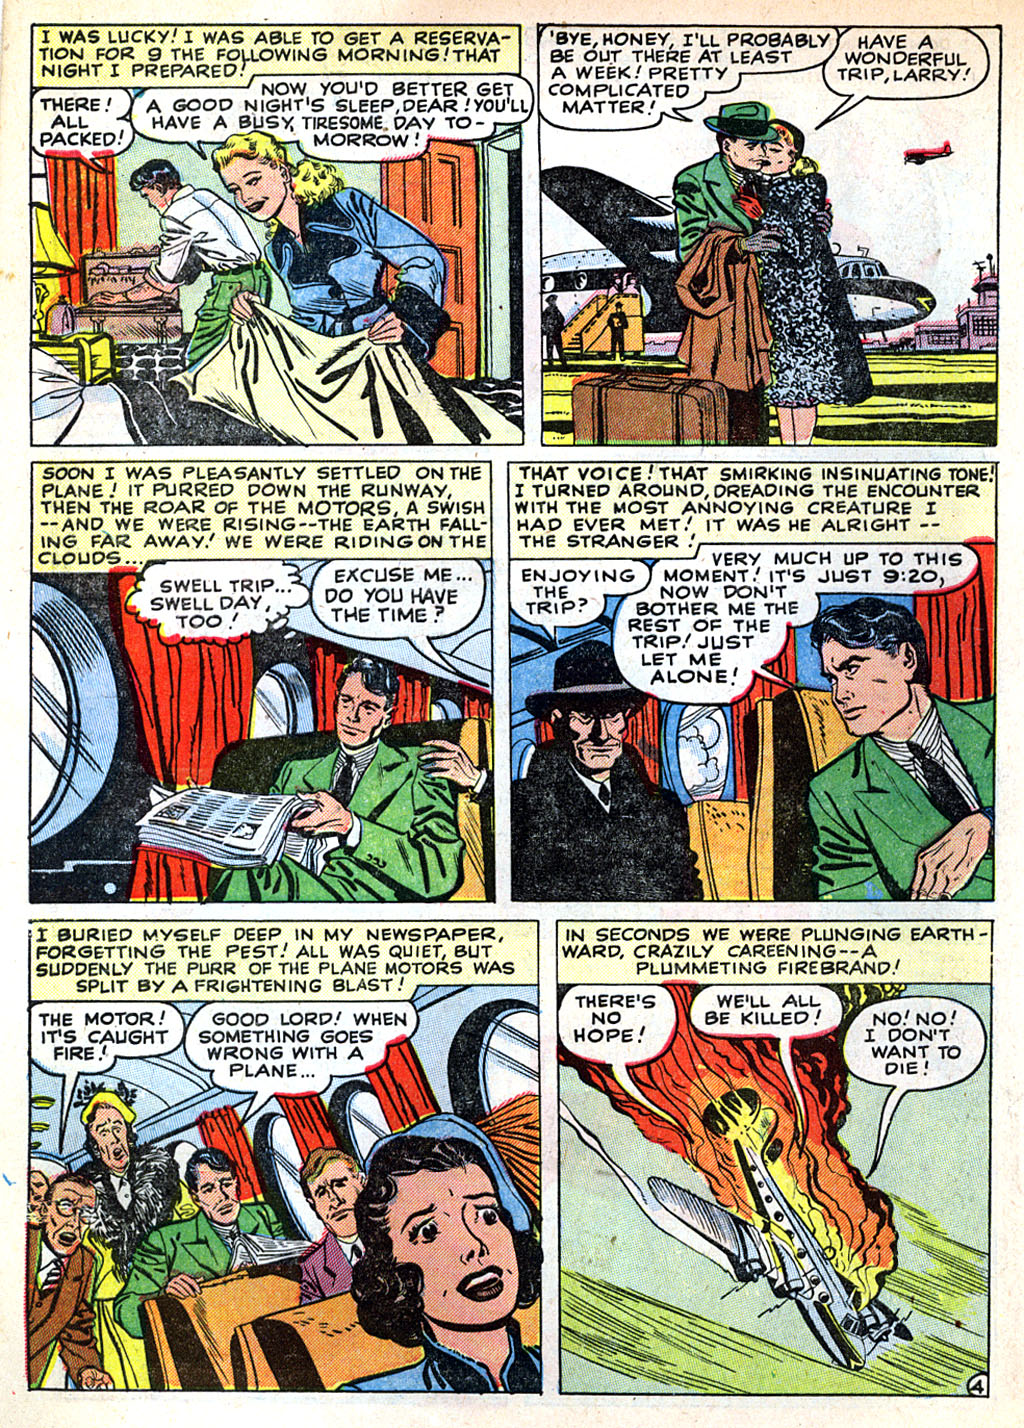 Marvel Tales (1949) 101 Page 5